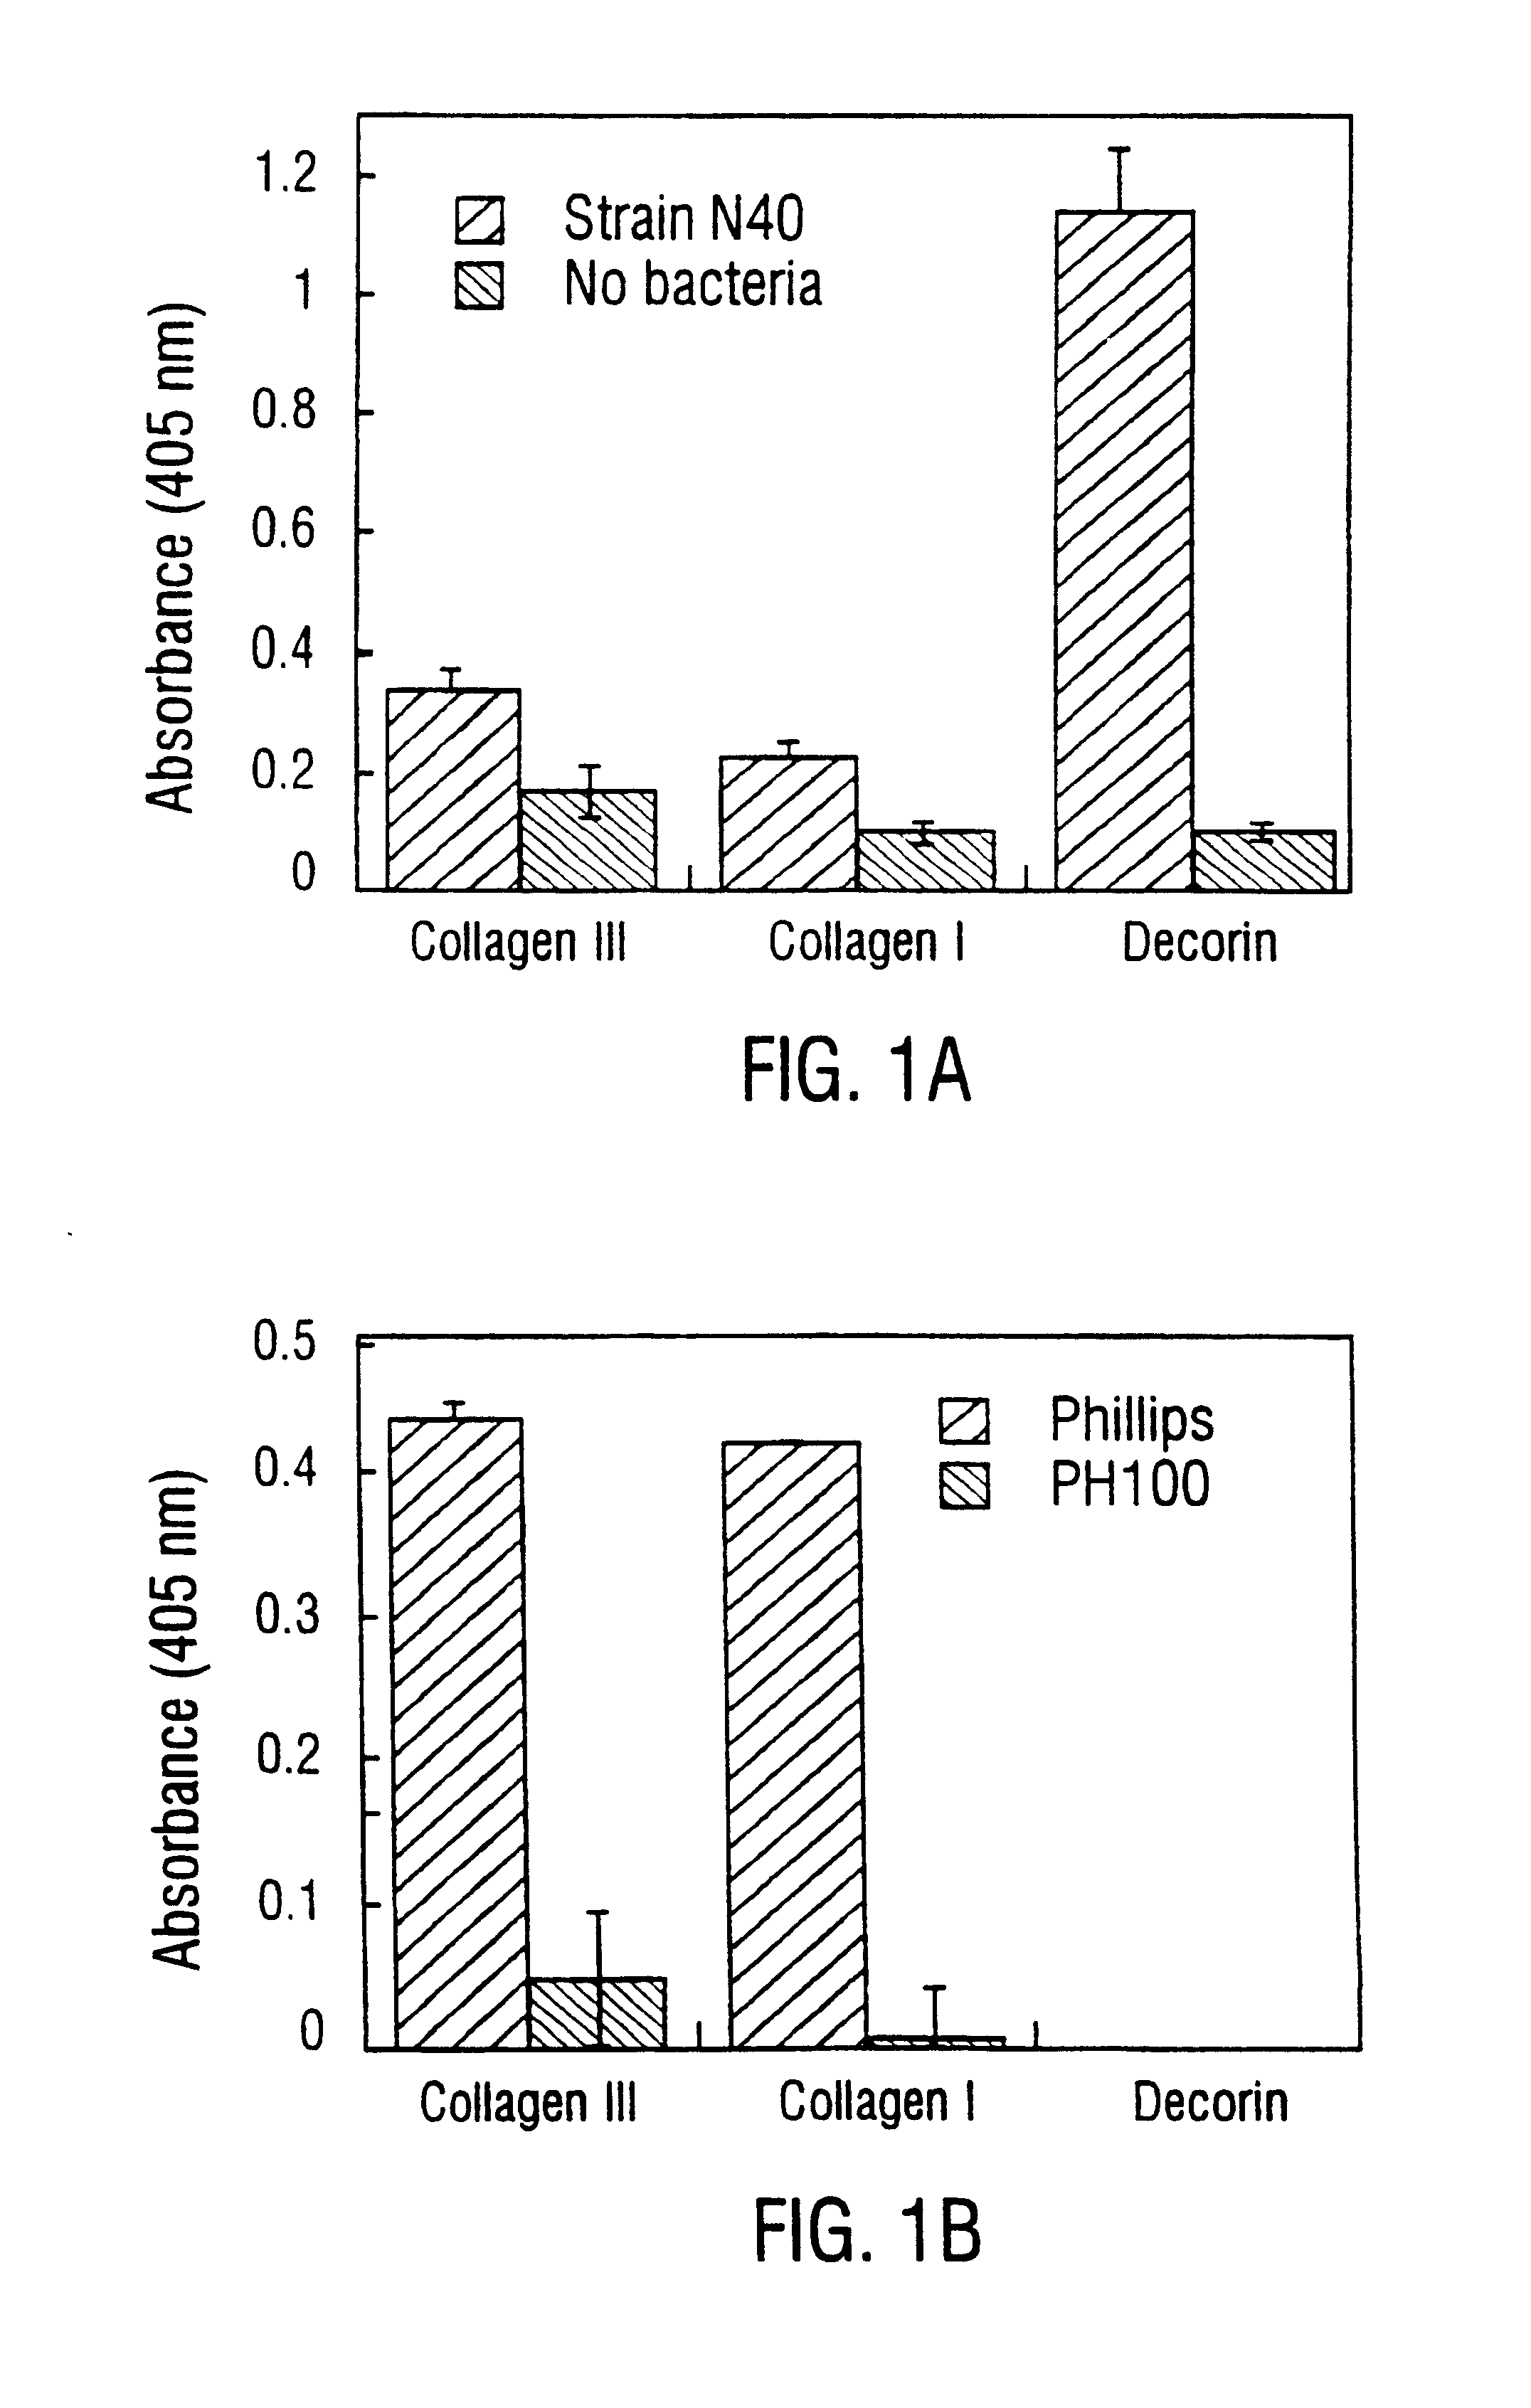 Decorin binding protein compositions and methods of use